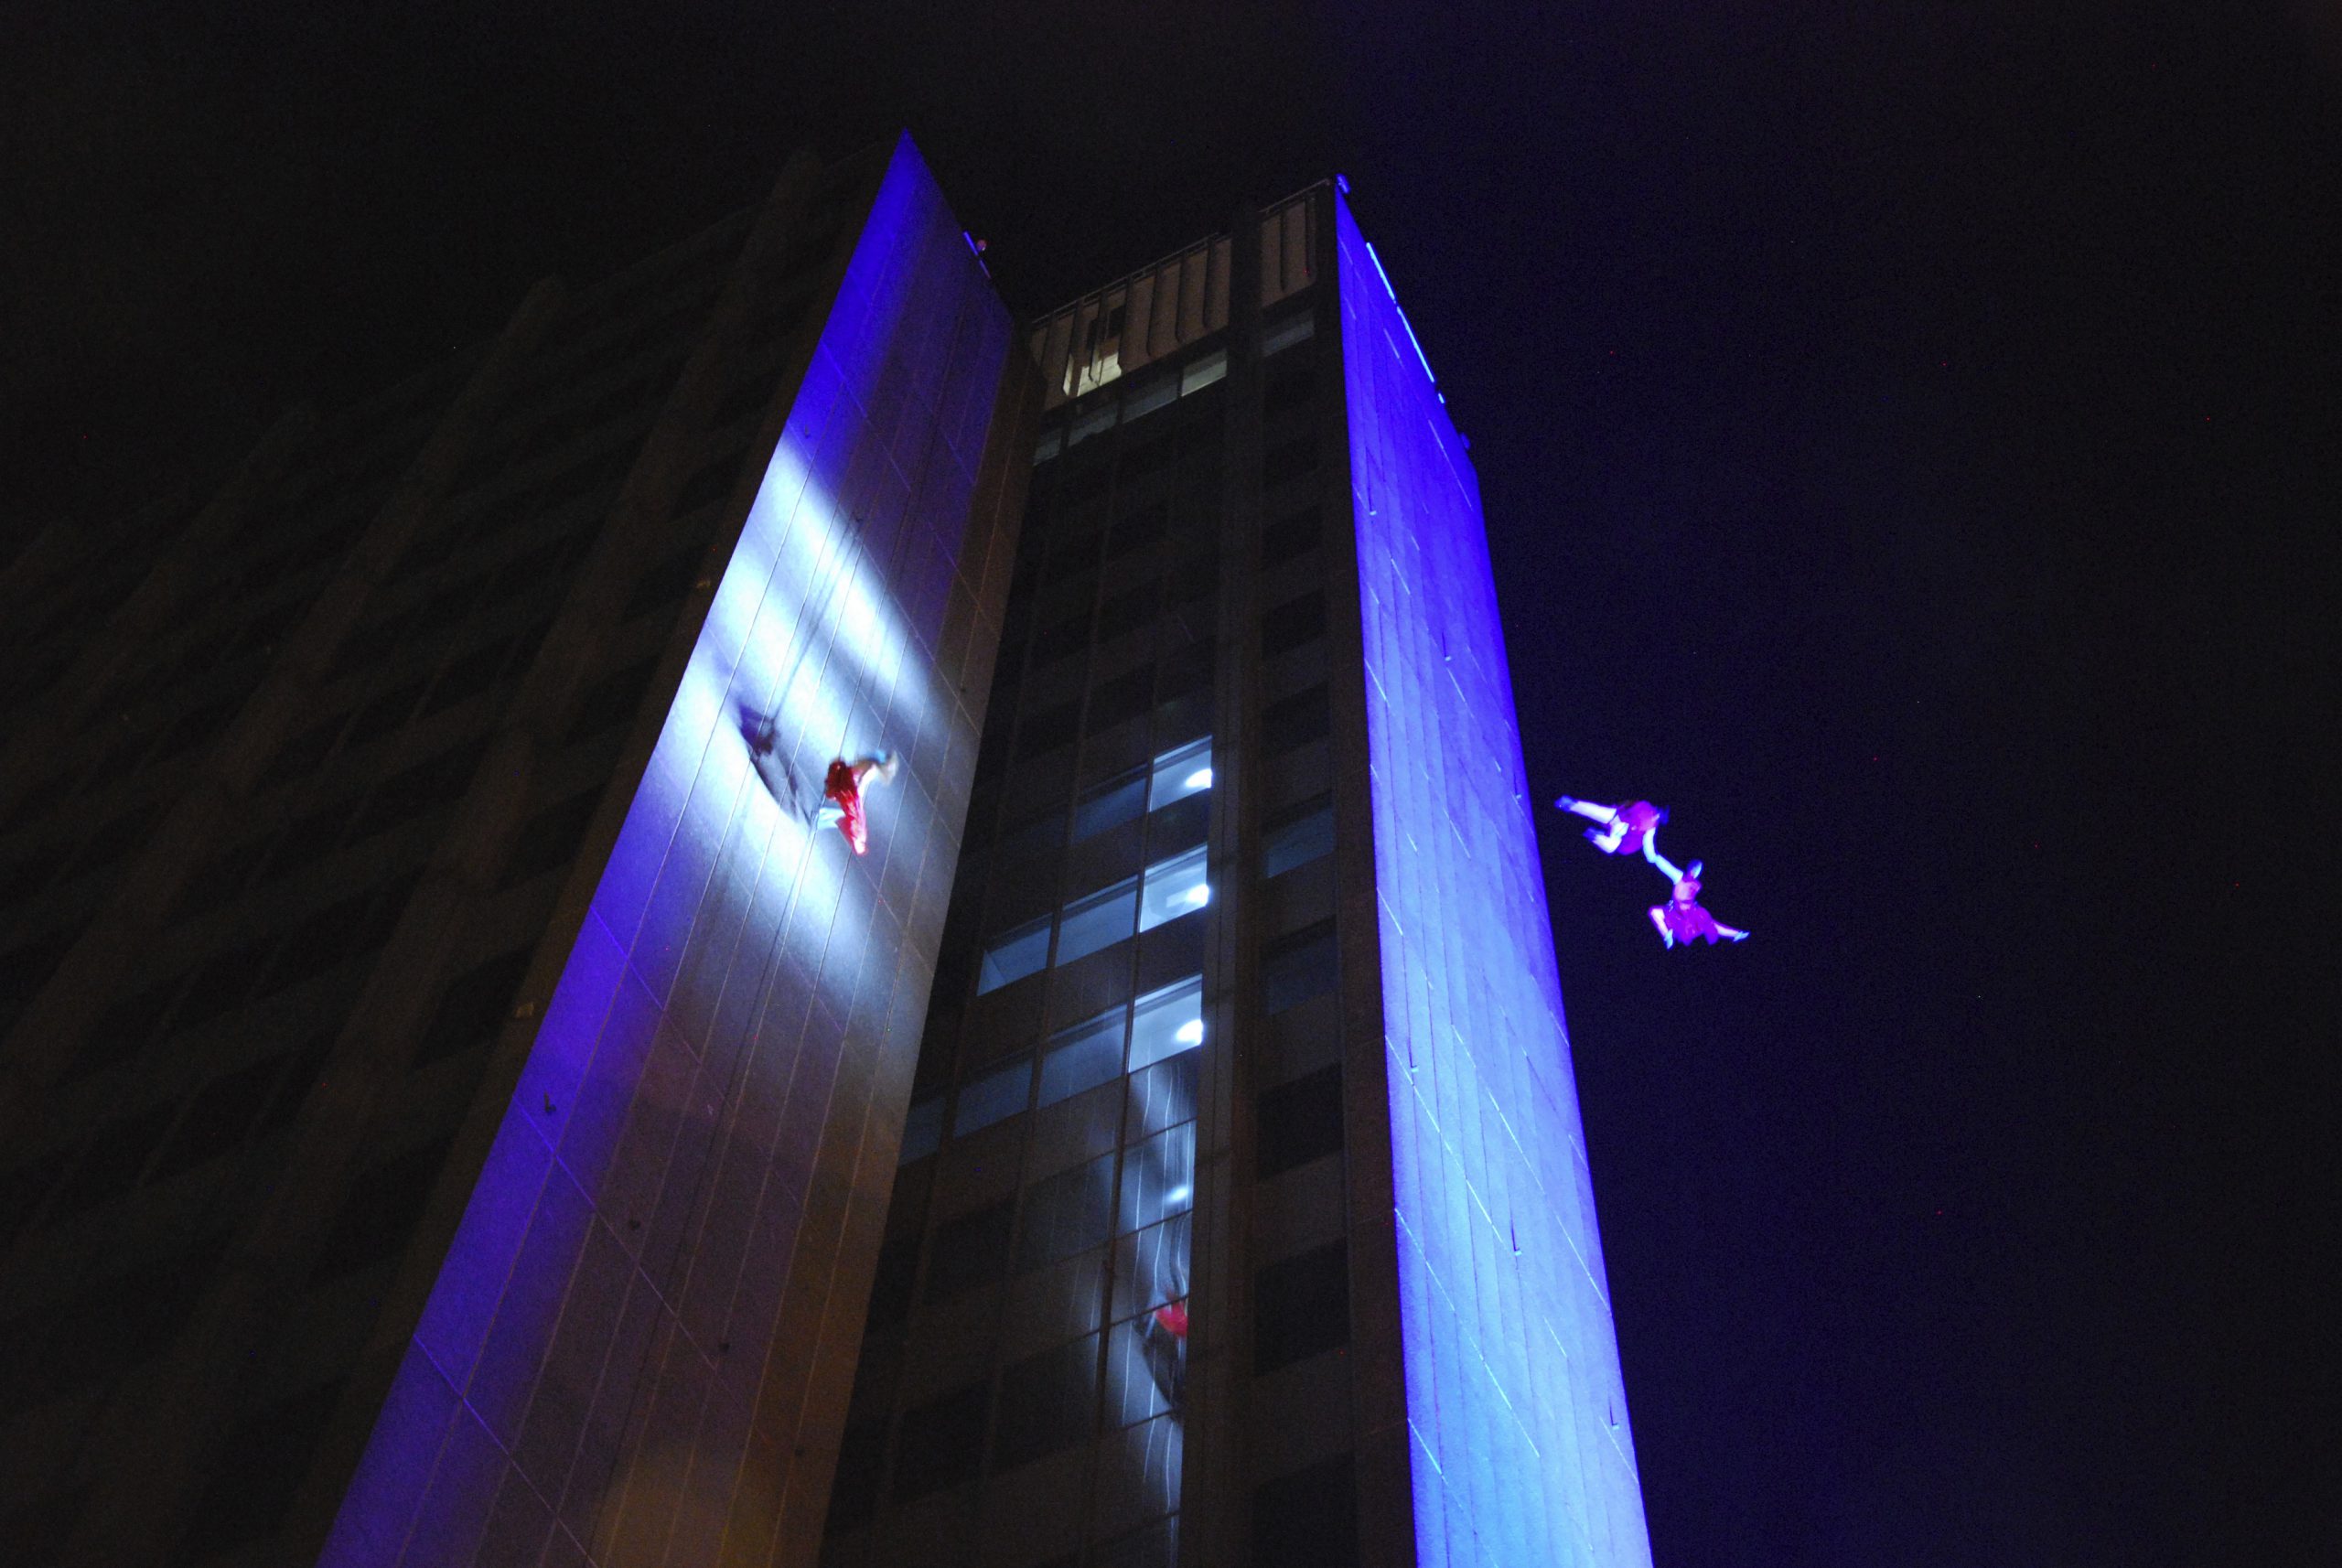 Three performers suspended from tall building (archway tower) spotlighted in blue at night